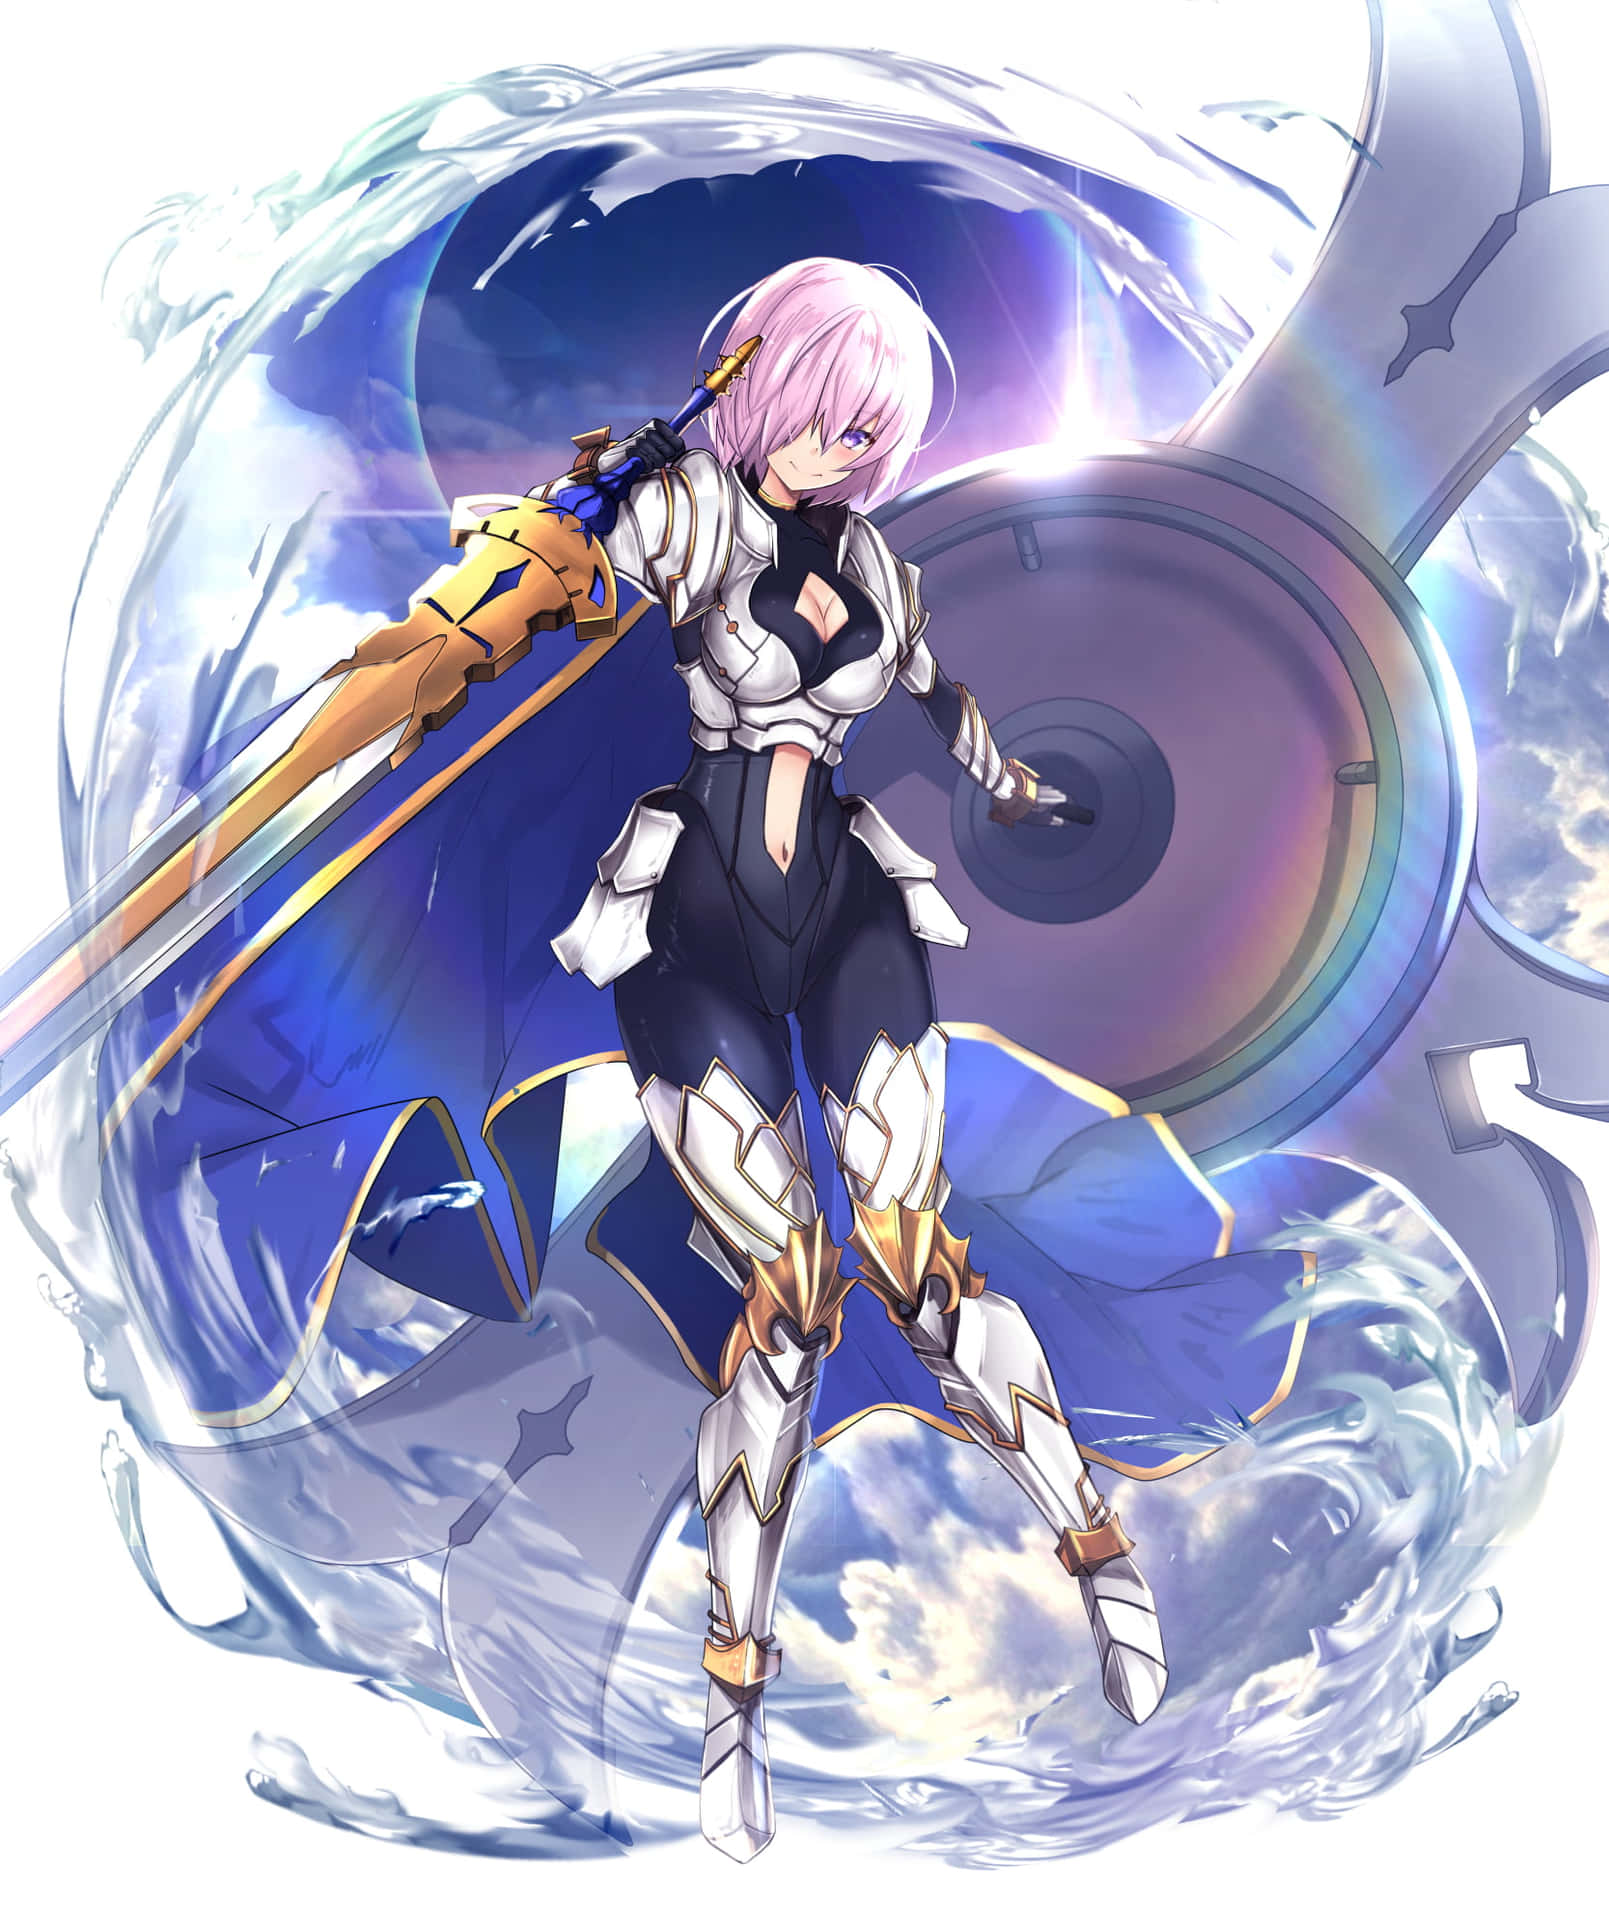 Experience the mythical world of Fate Grand Order